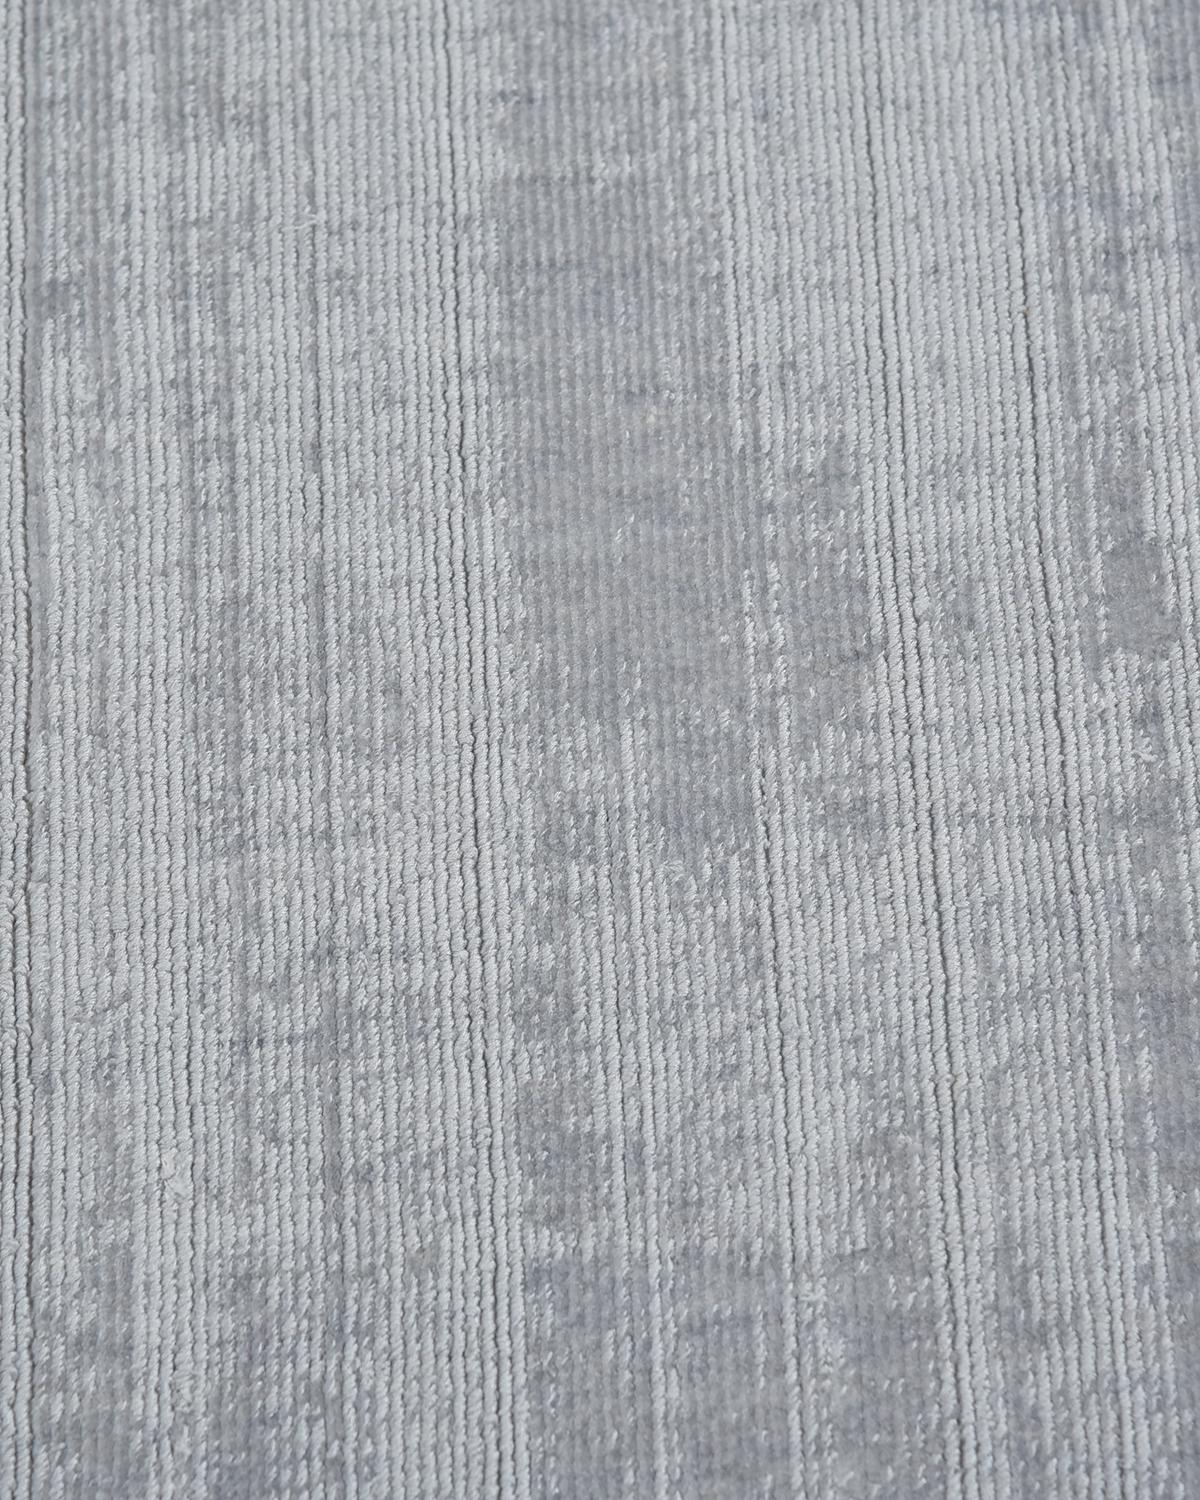 Solo Rugs Solid Modern Hand Loomed Gray 5 x 8 Area Rug (Indisch) im Angebot